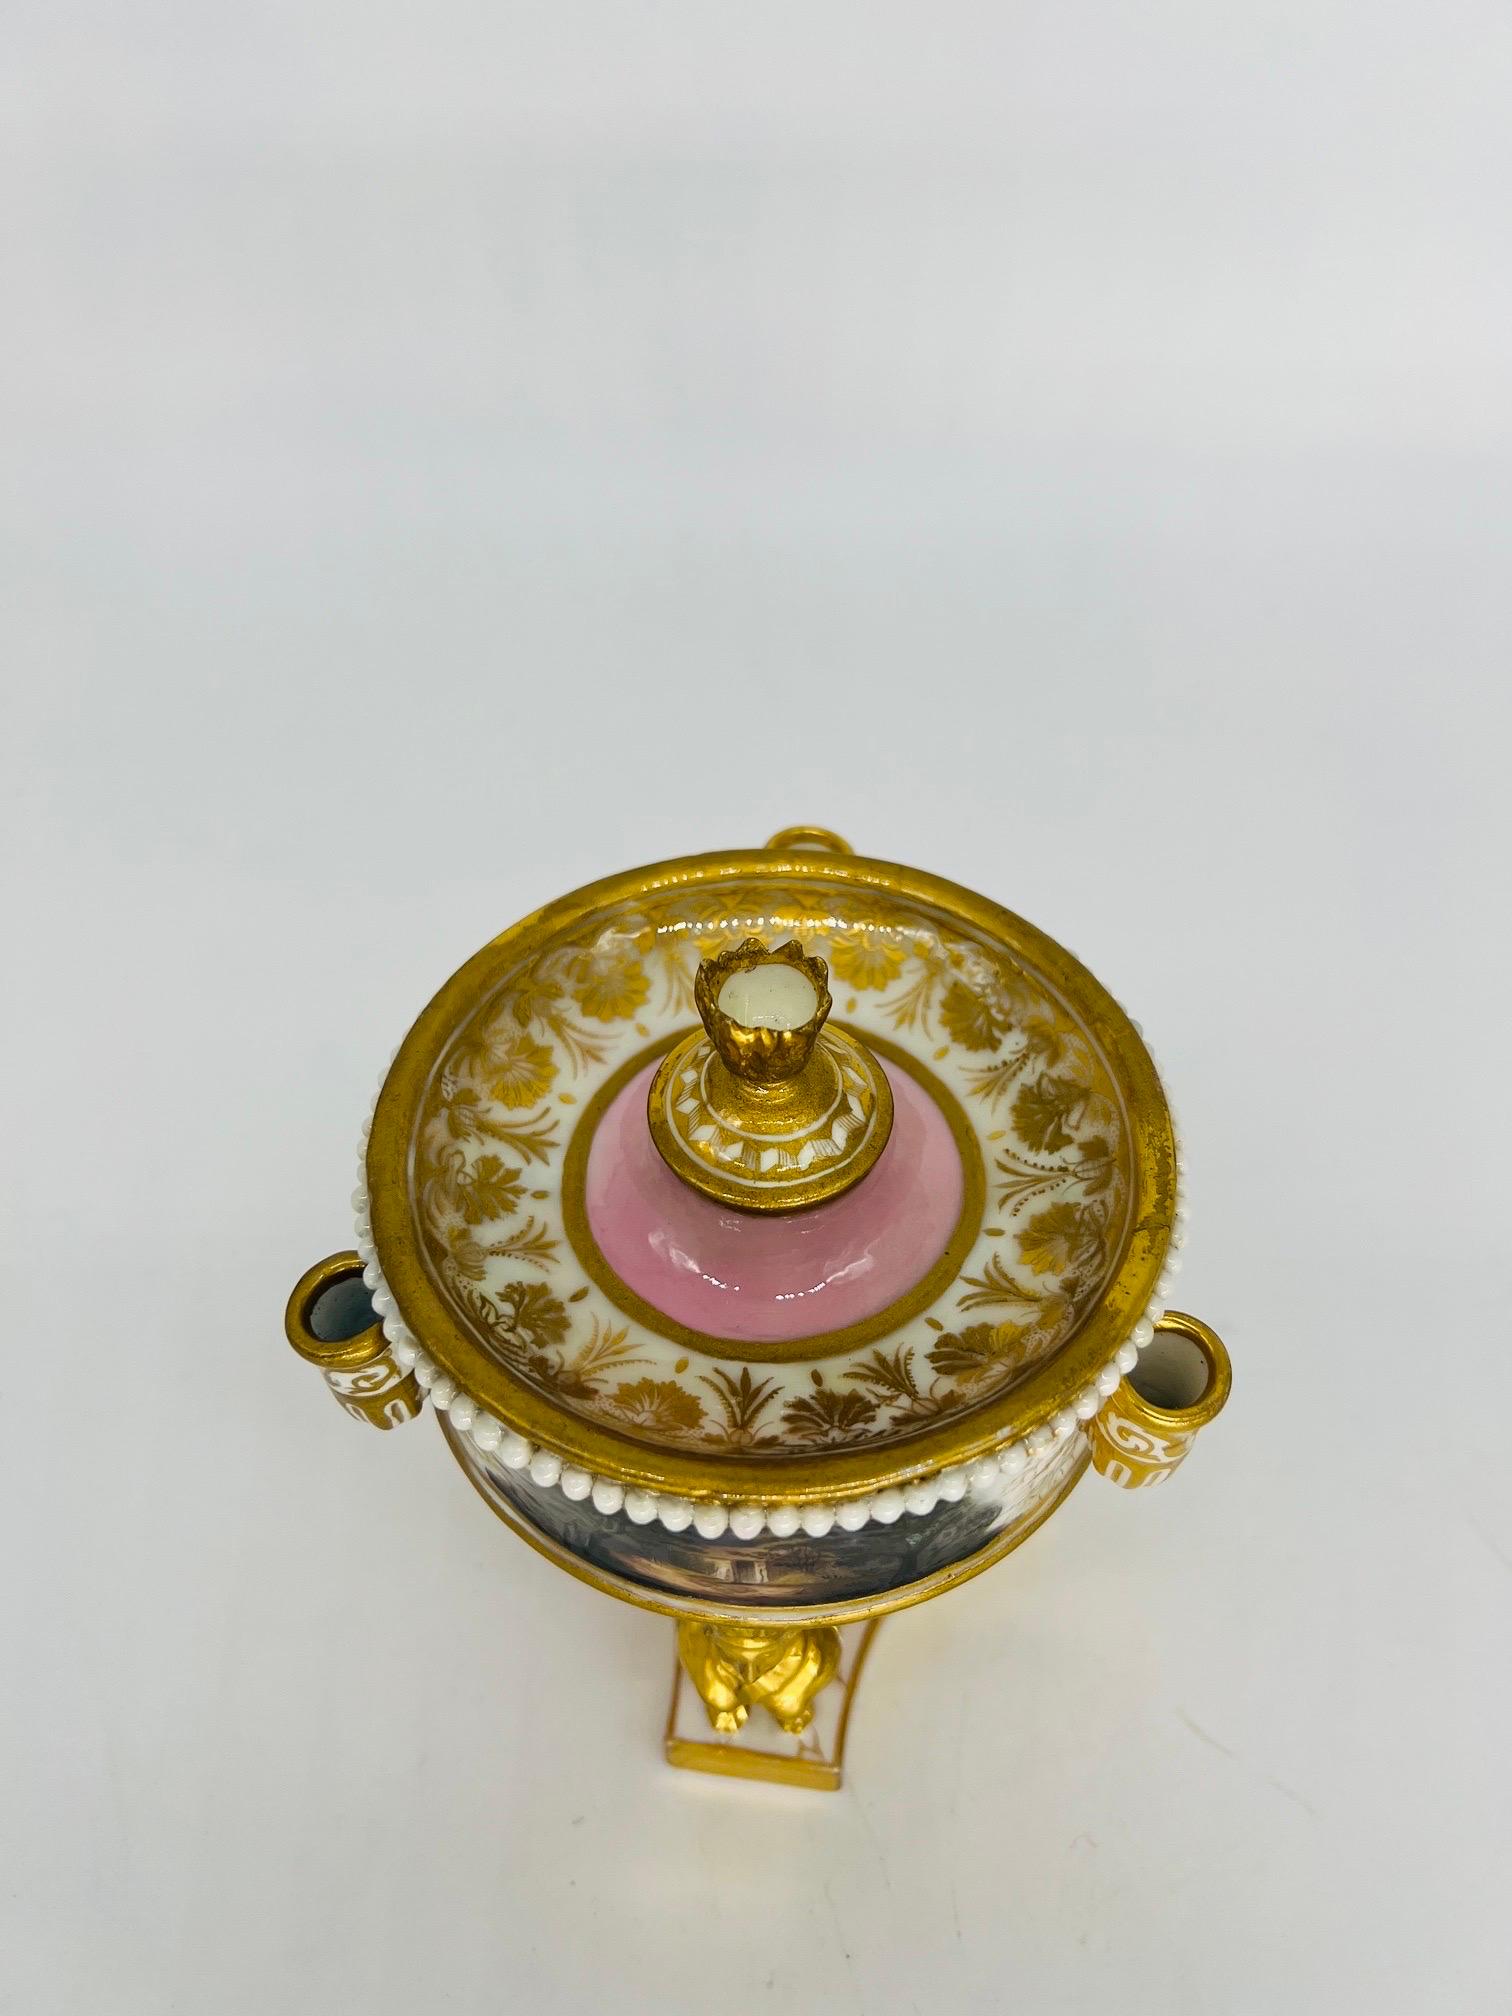 Flight Barr & Barr Porcelain Inkwell, Homage to Robert Burns, circa 1810 In Good Condition For Sale In Atlanta, GA